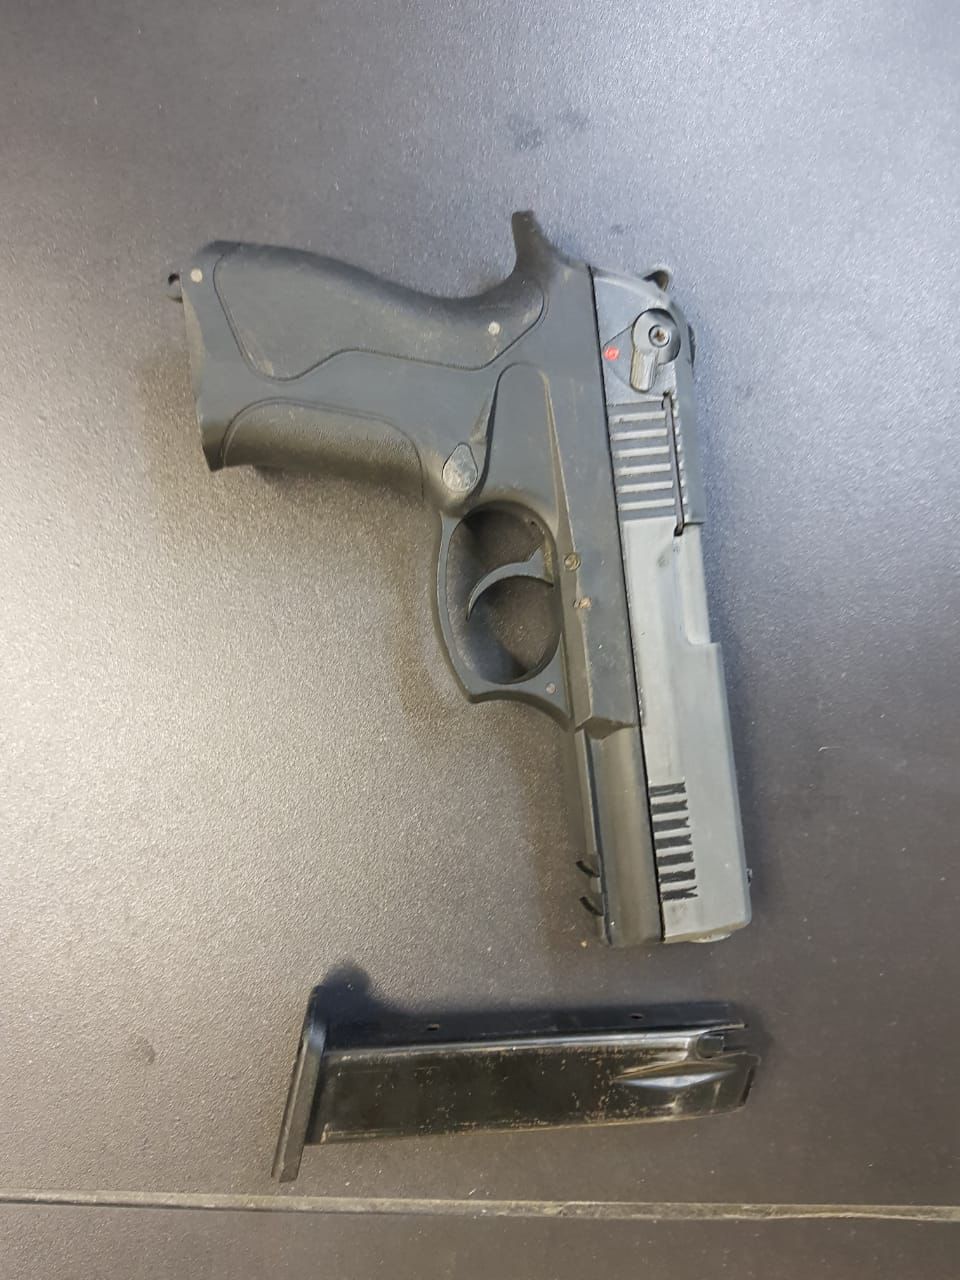 Suspect arrested for possession of unlicensed firearm and ammunition in Atlantis